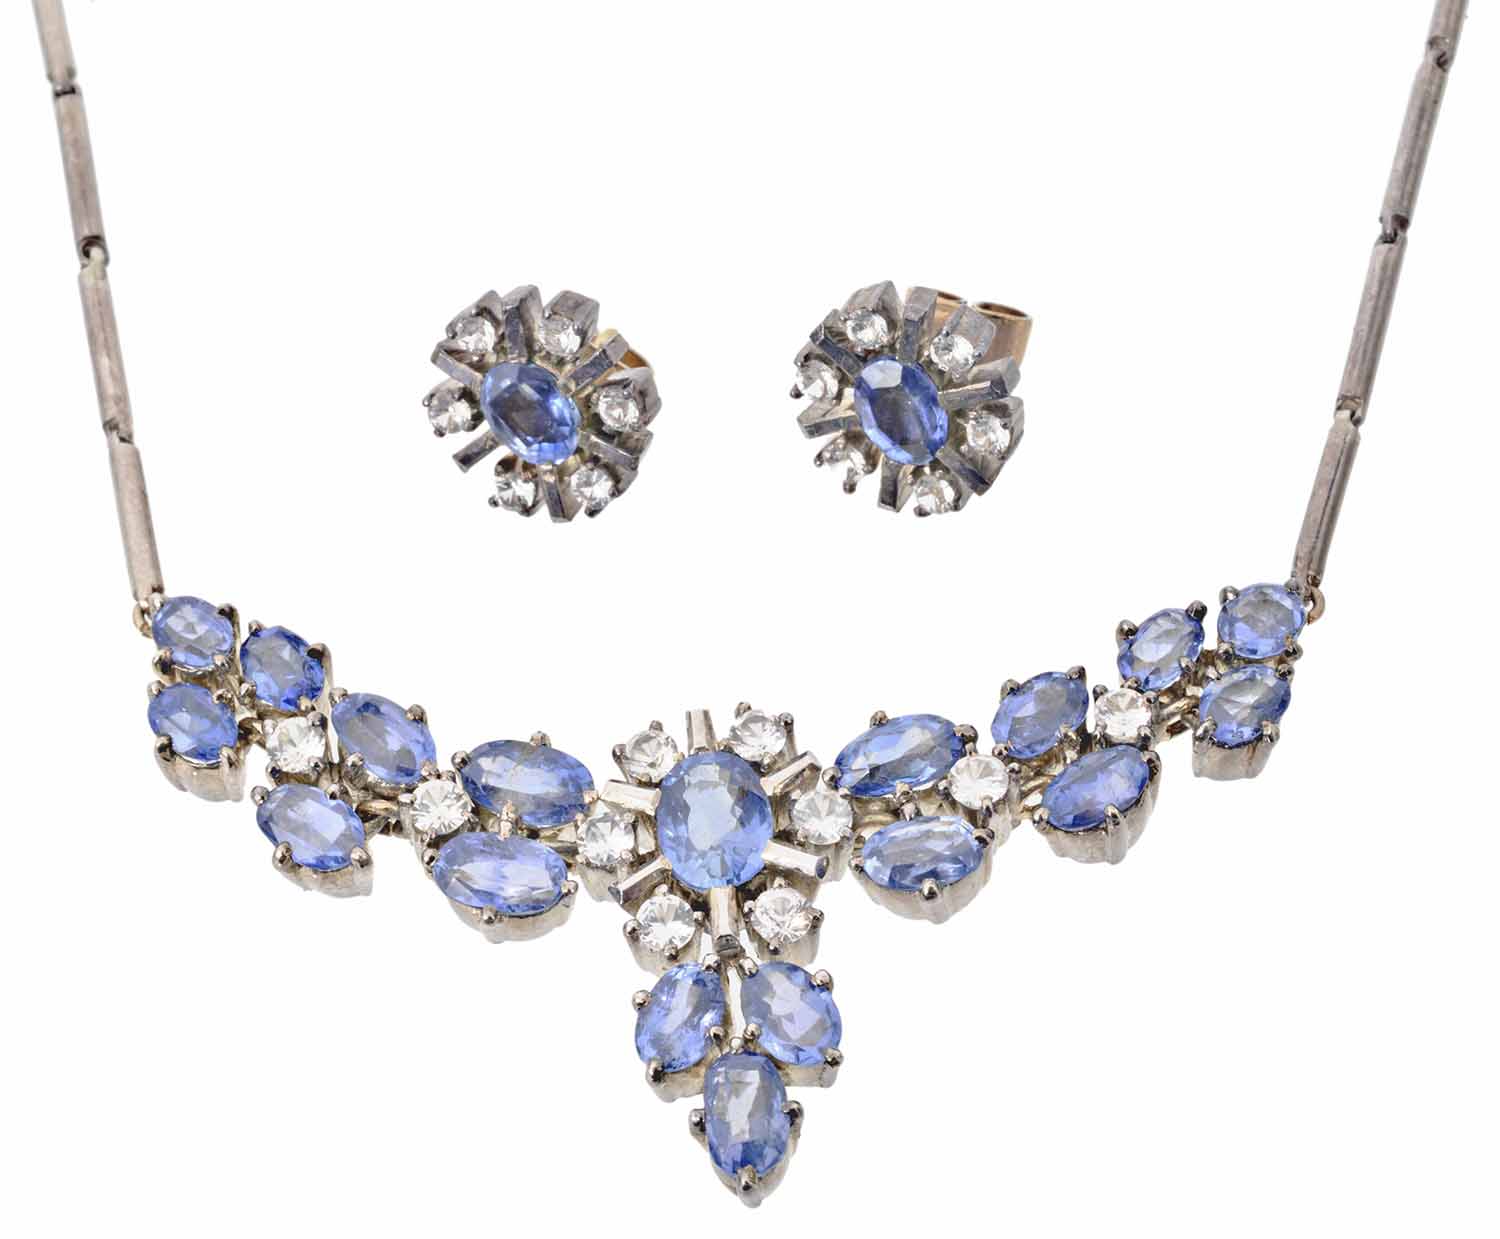 An attractive blue and white gem set necklace and earrings